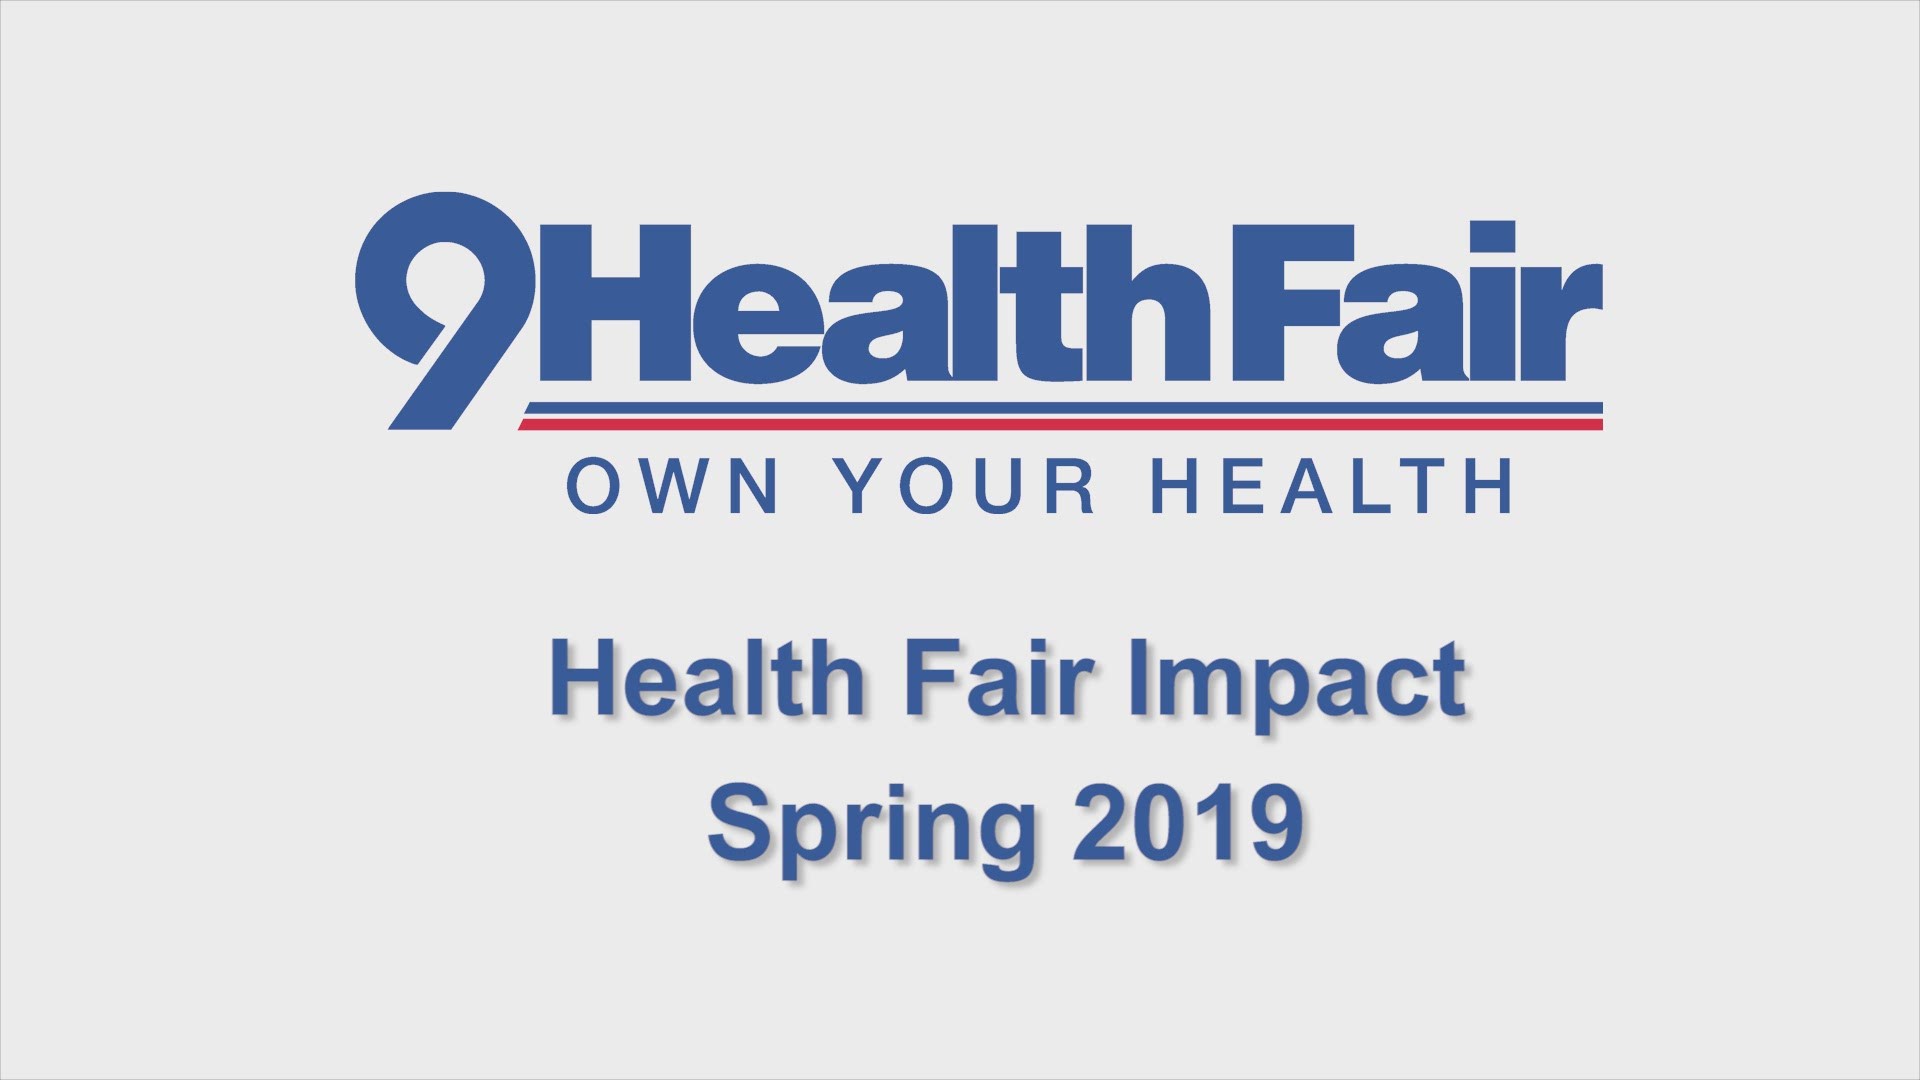 75 percent of people screened at a 9Health Fair in the spring of 2019, had high LDL (bad) cholesterol an indicator for heart disease.